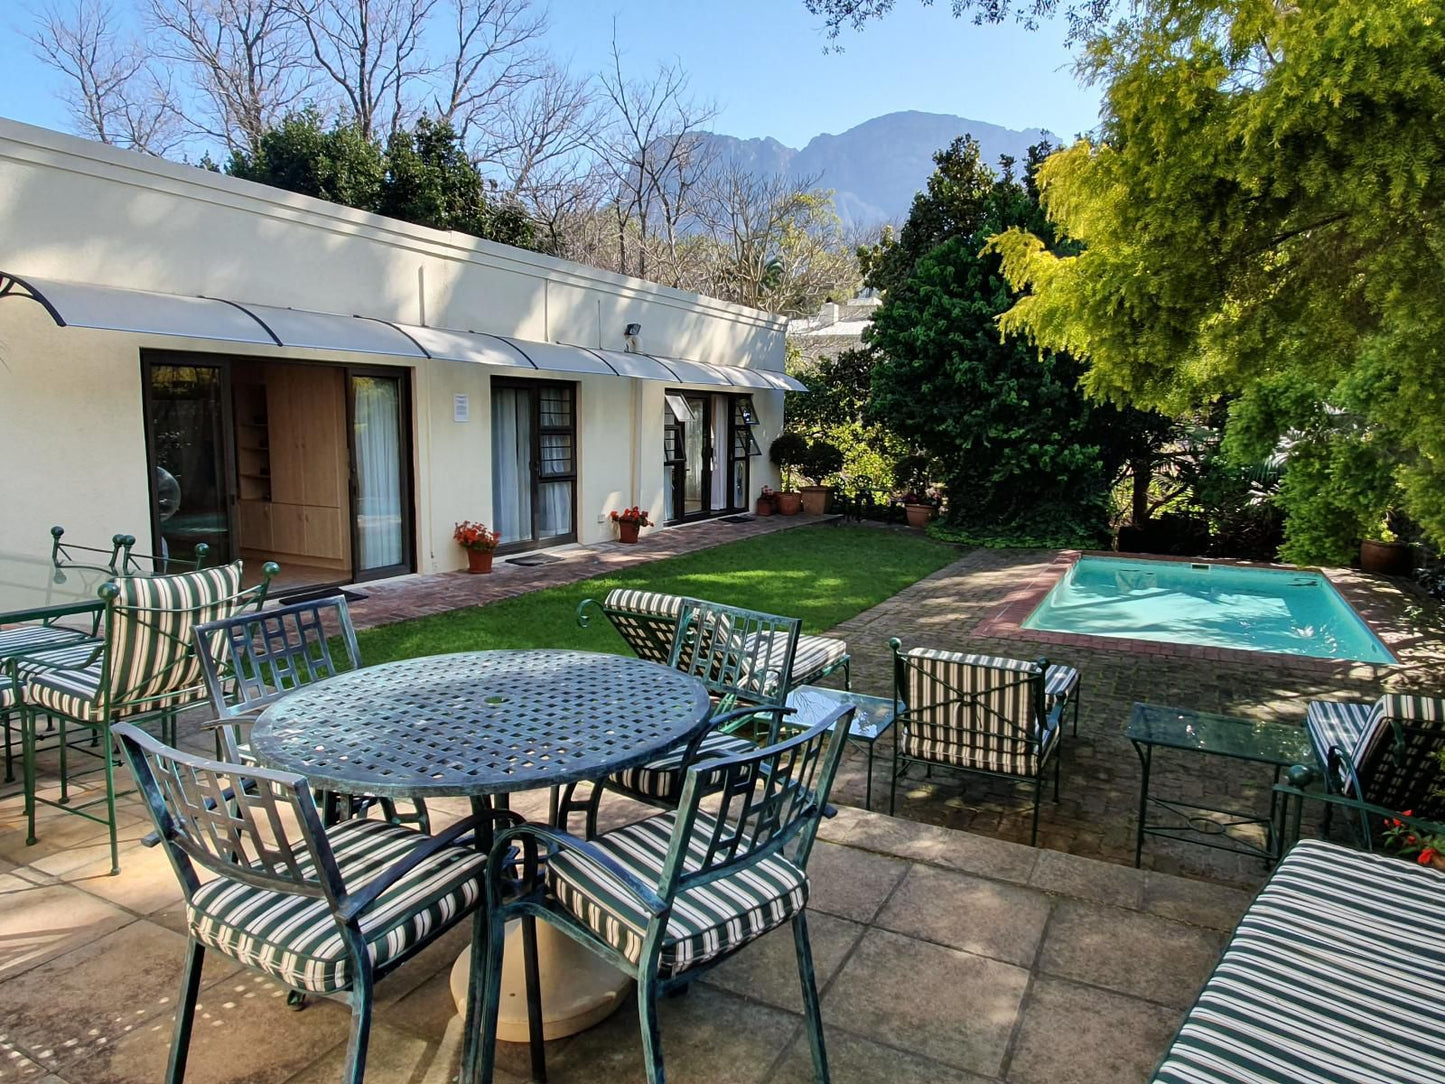 Riversong Guest House Newlands Cape Town Western Cape South Africa House, Building, Architecture, Garden, Nature, Plant